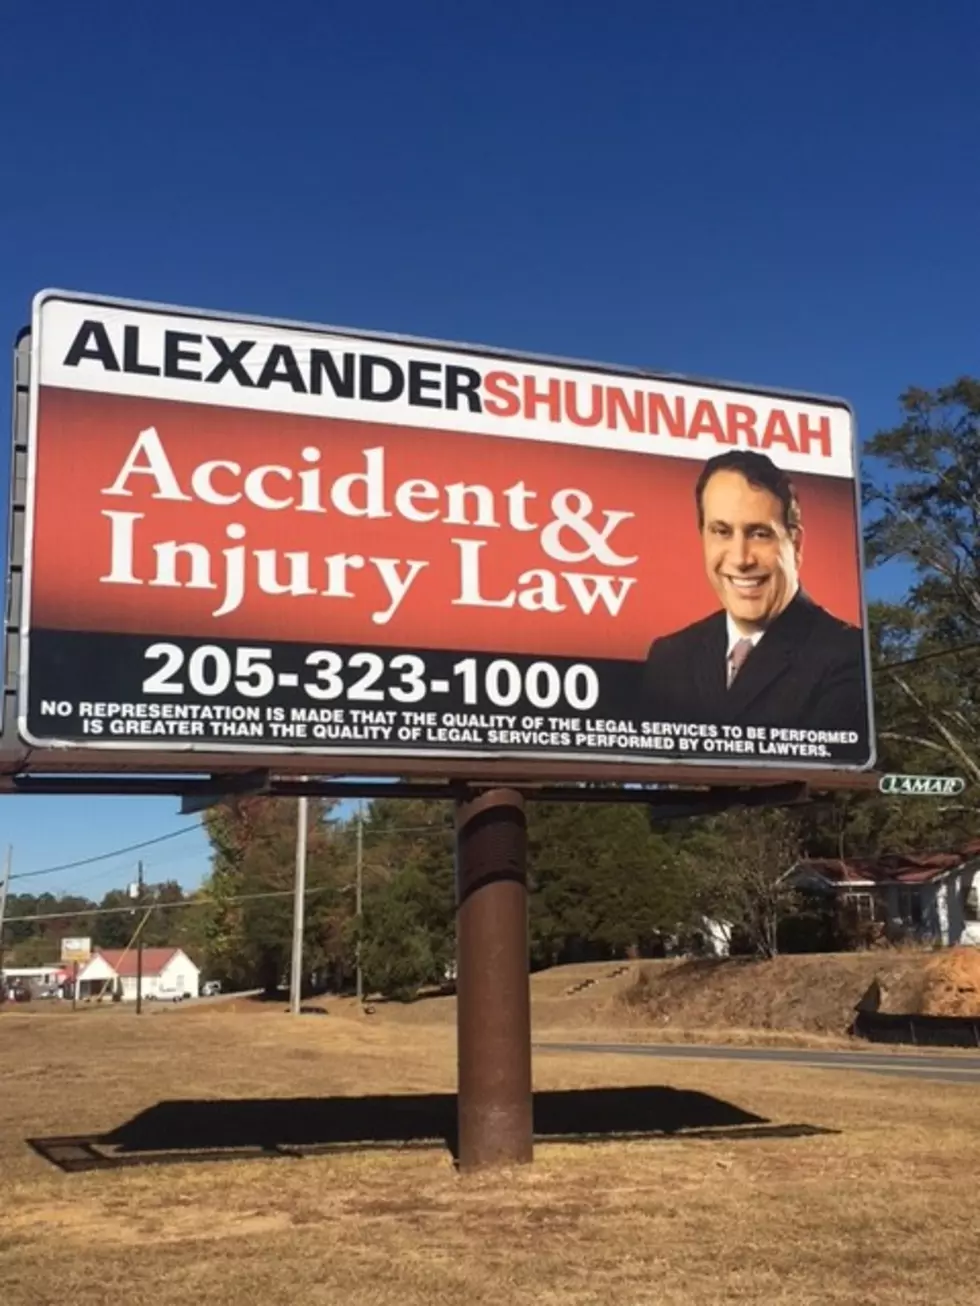 The Actual Number Of Alexander Shunnarah Signs From T-Town To The Georgia Line Is?